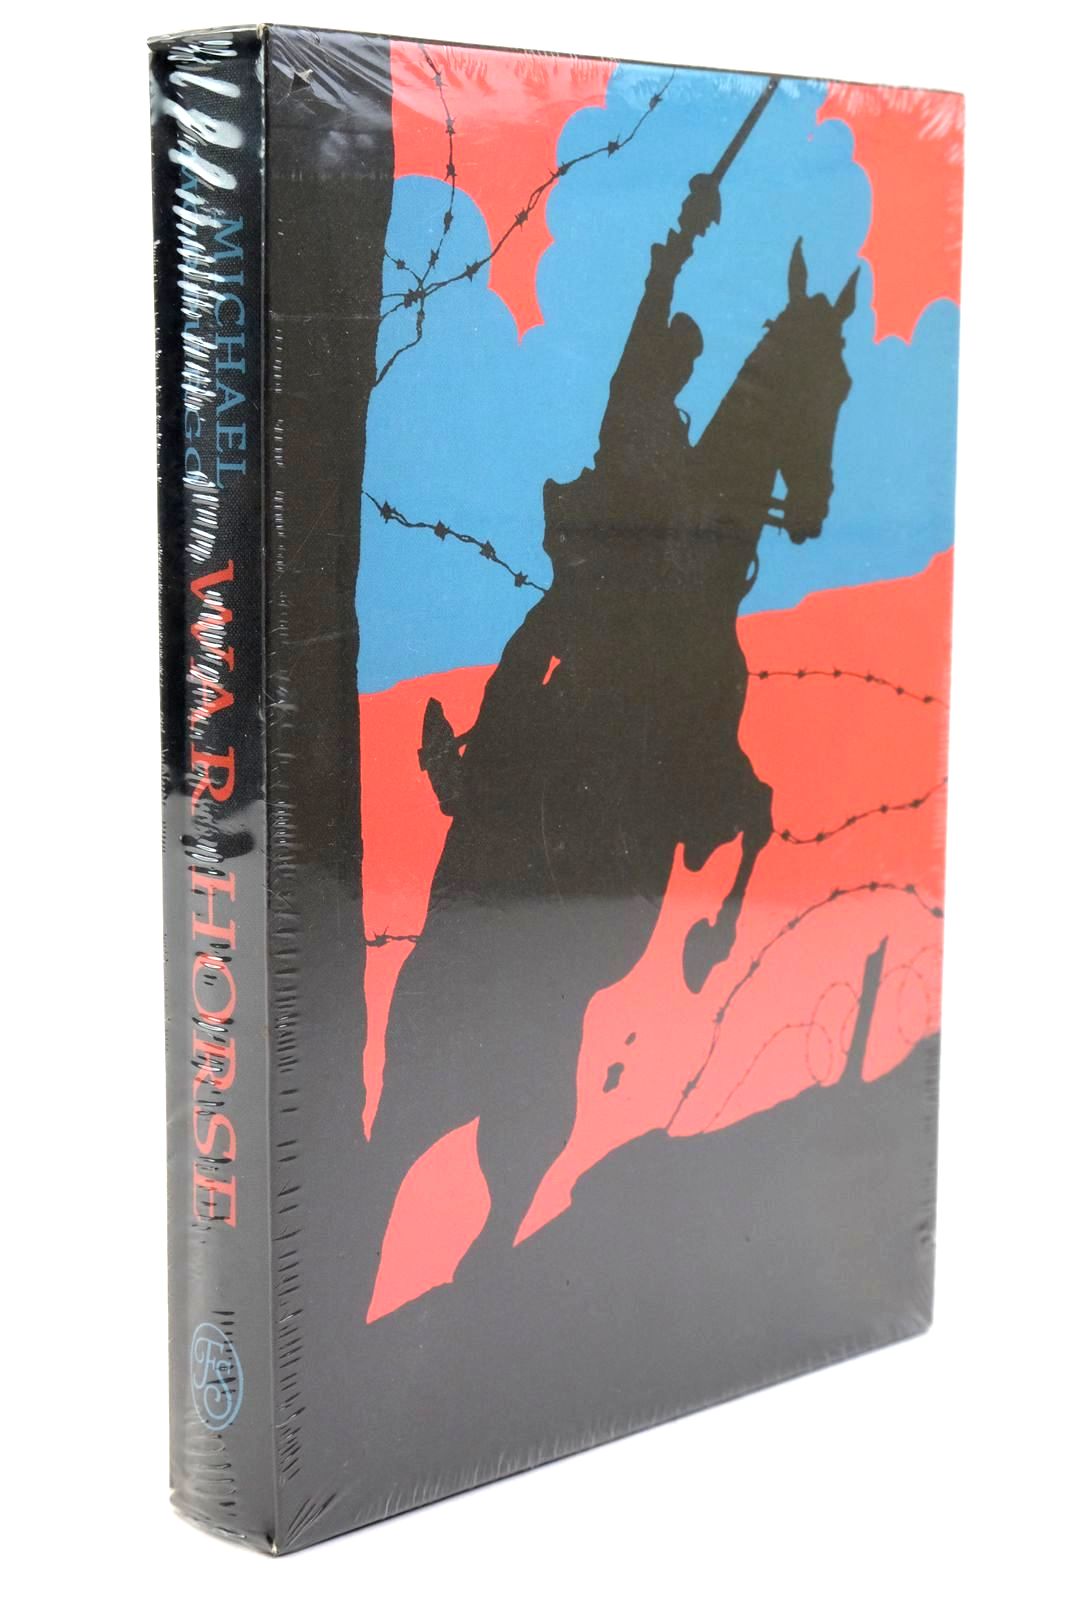 Photo of WAR HORSE written by Morpurgo, Michael illustrated by Marks, Alan published by Folio Society (STOCK CODE: 1321799)  for sale by Stella & Rose's Books